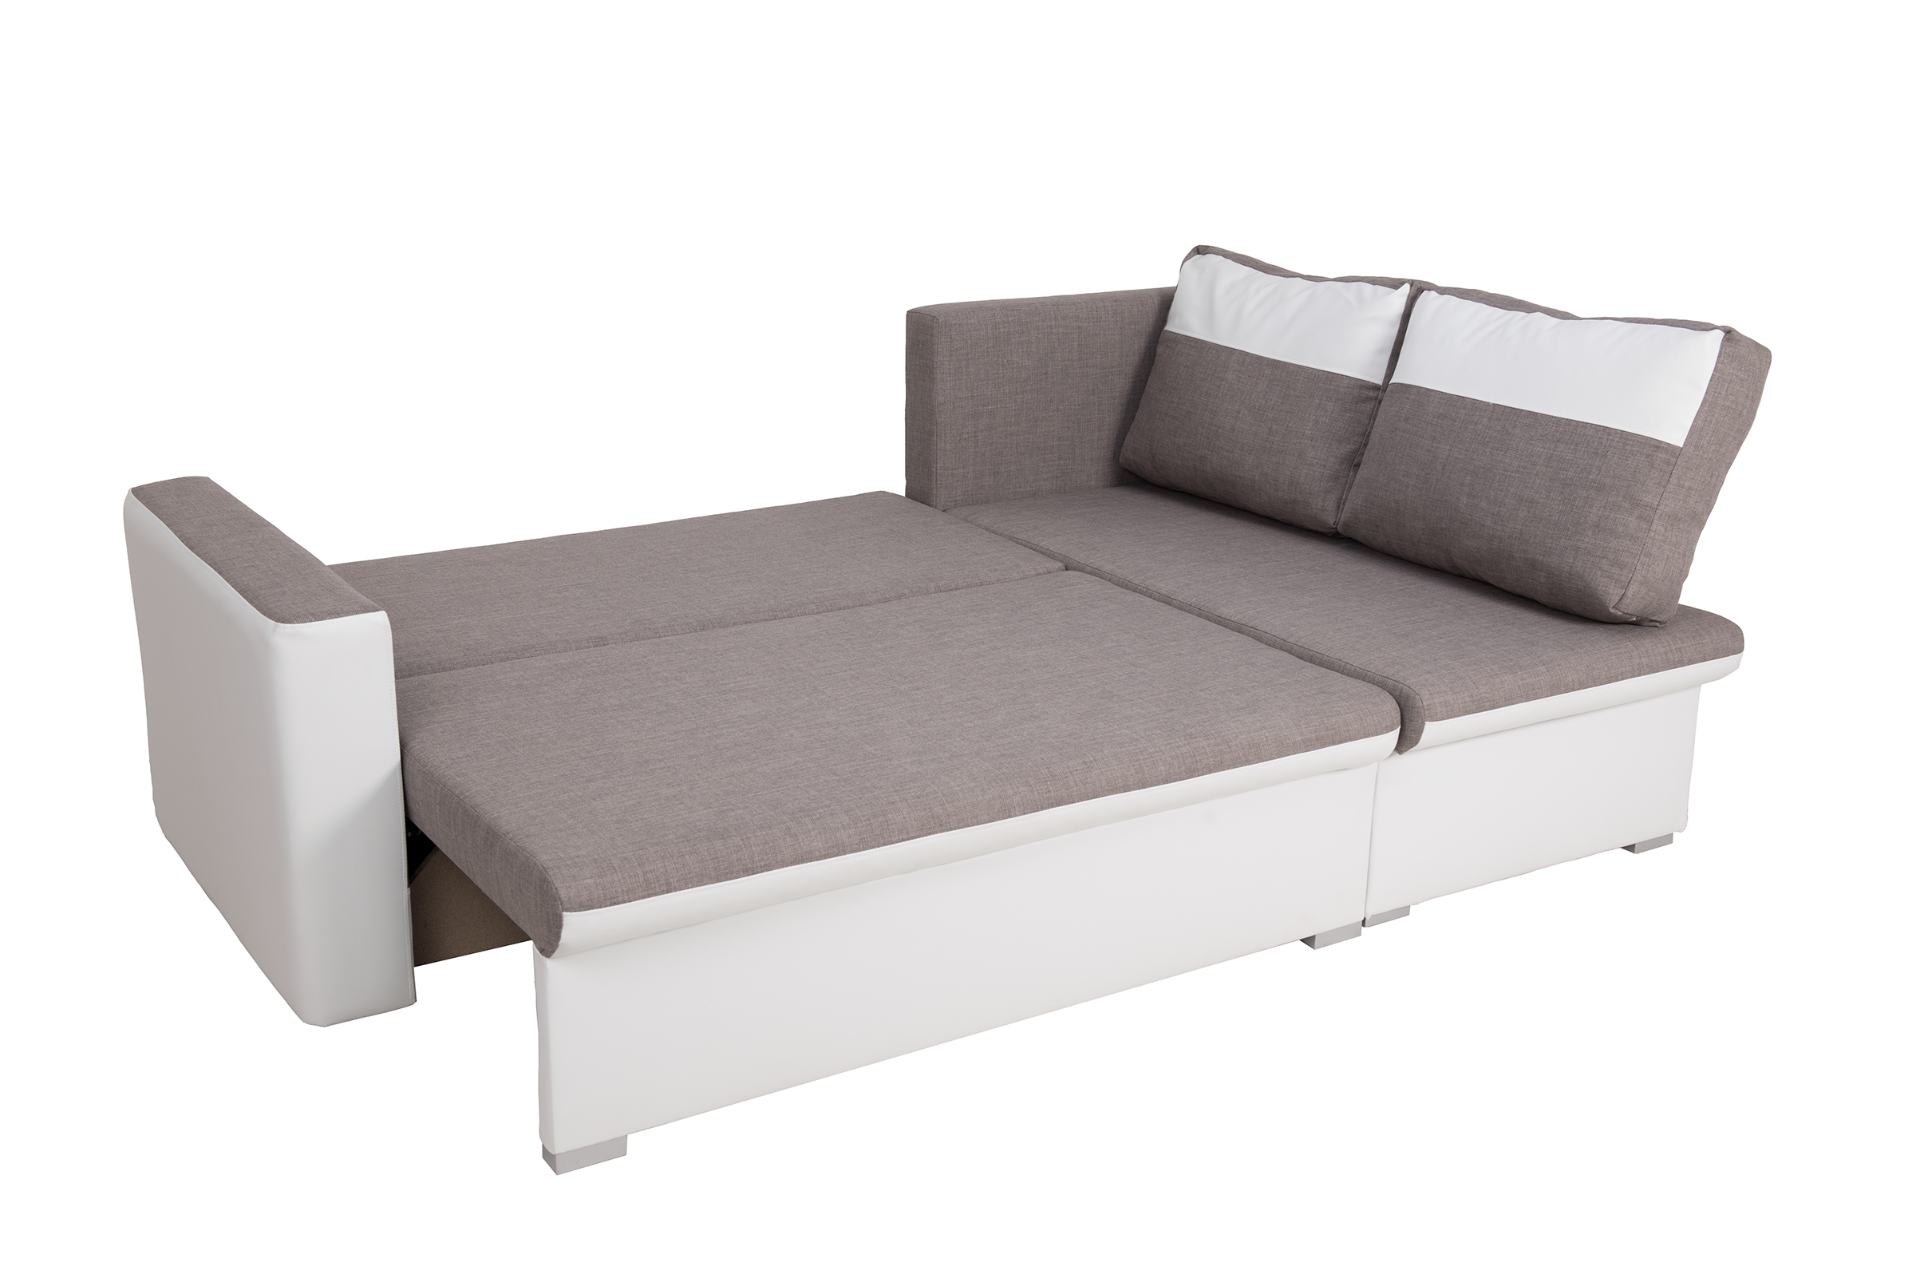 Flàvio corner sofa bed right hand facing in white and grey faux leather - Image 2 of 3